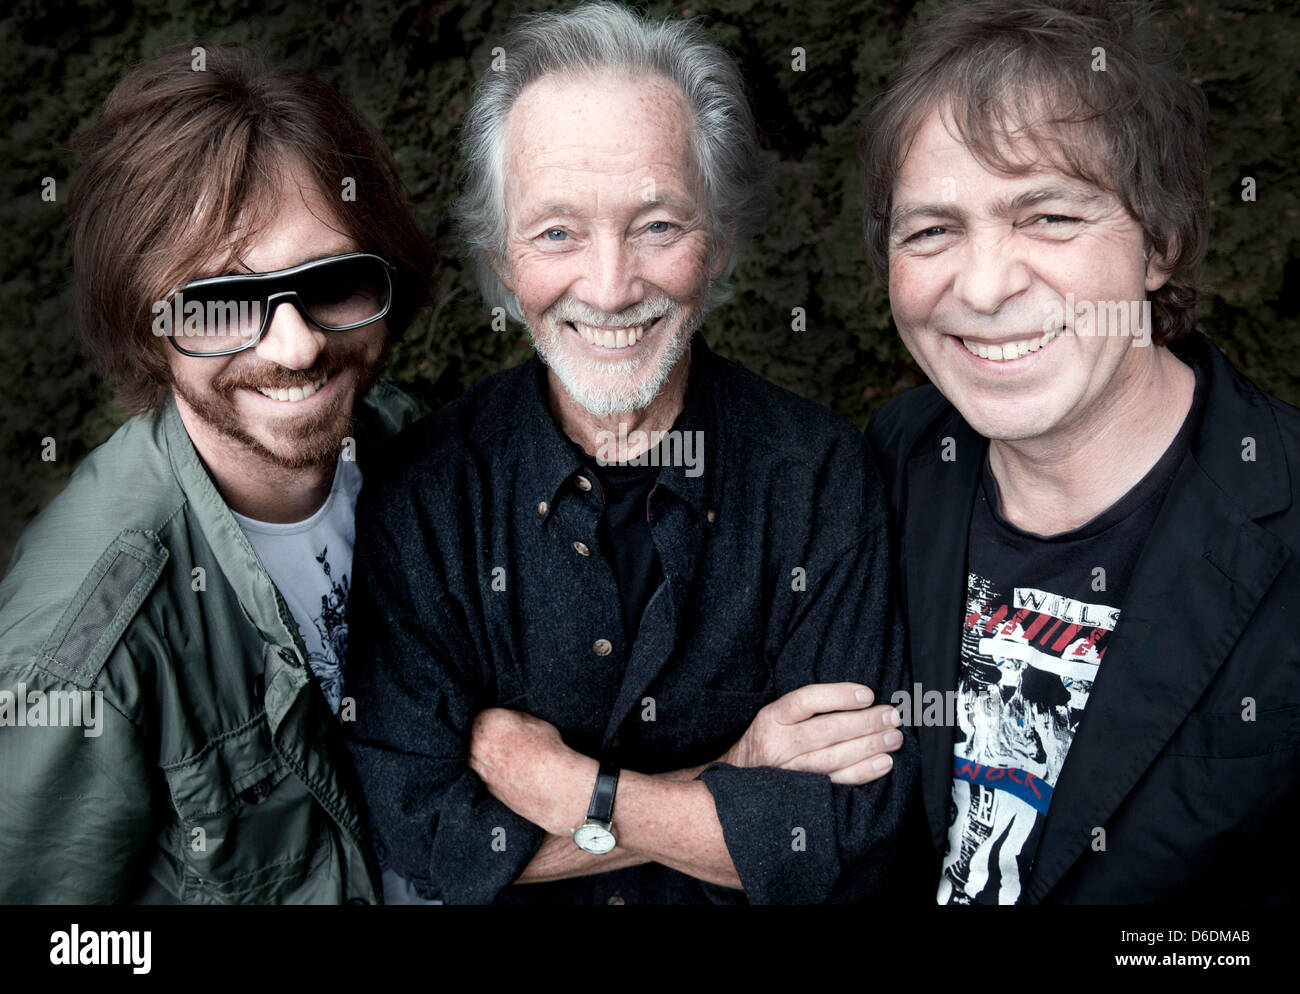 Graphic artist and musician Klaus Voormann (C) and 'Fools Garden' guitar  player Volker Hinkel (L) and singer Peter Freudenthaler (R) pose in Munich,  Germany, 03 September 2012. Fools Garden's 1996 hit single '